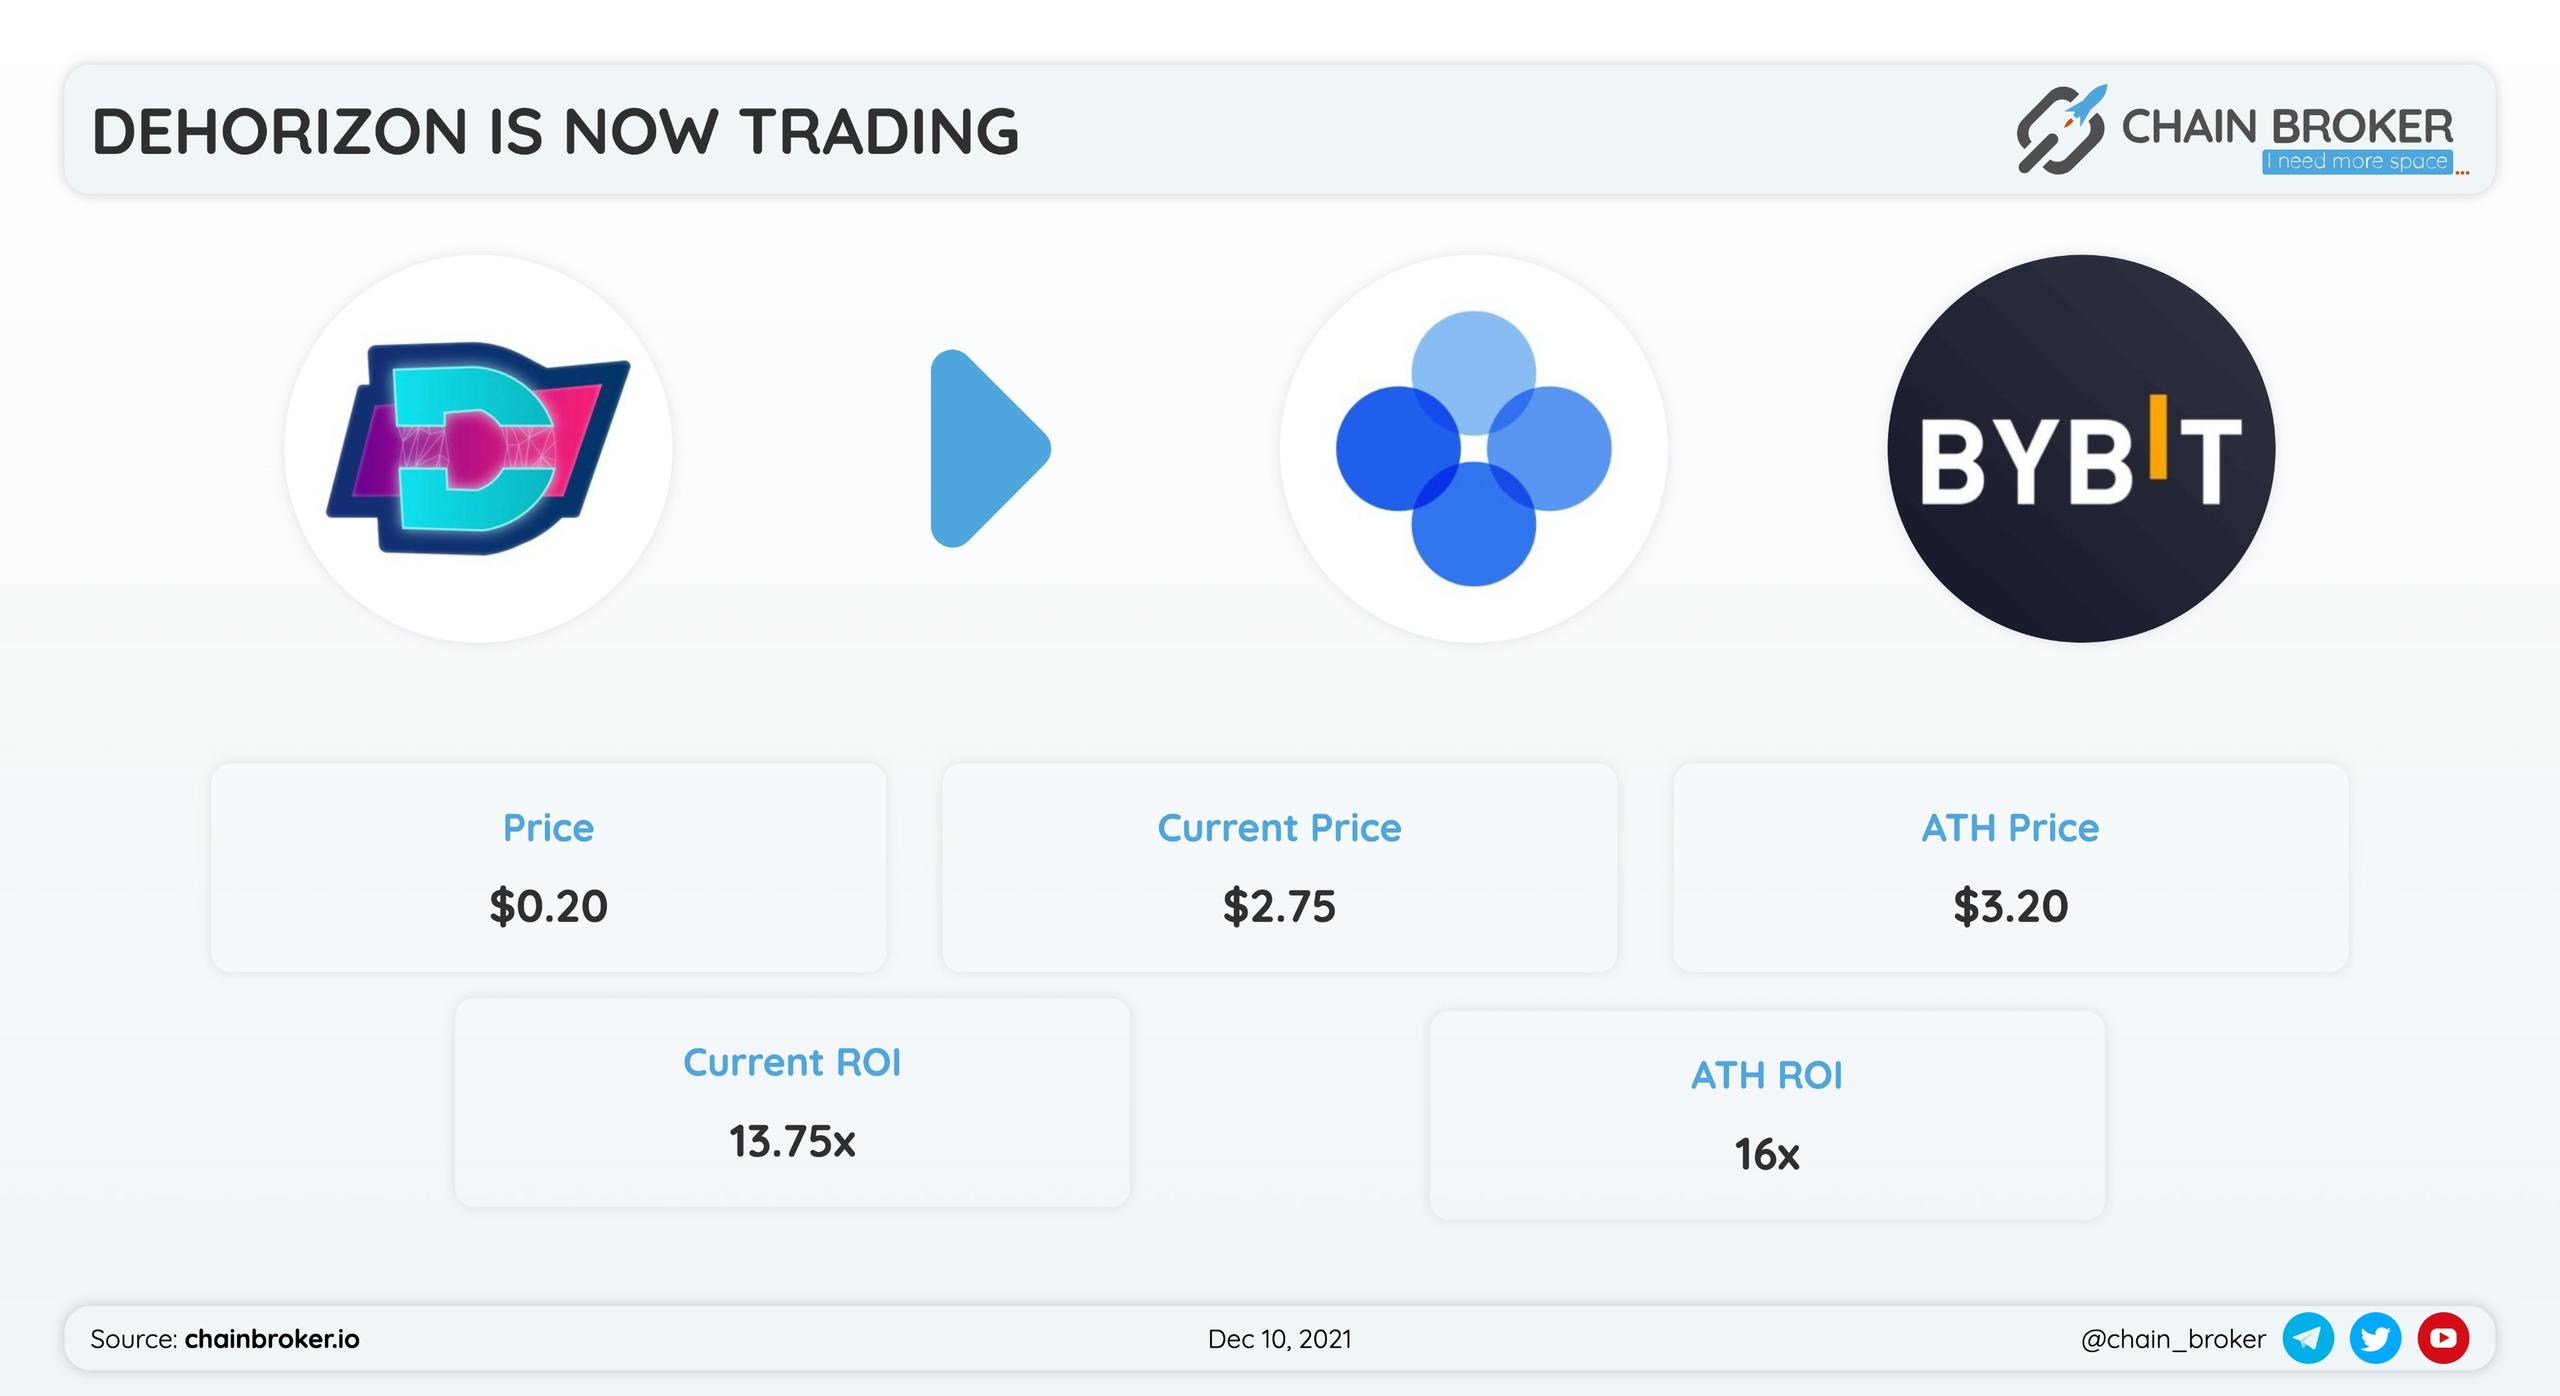 DeHorizon $DEVT has been listed on OKEX and Bybit